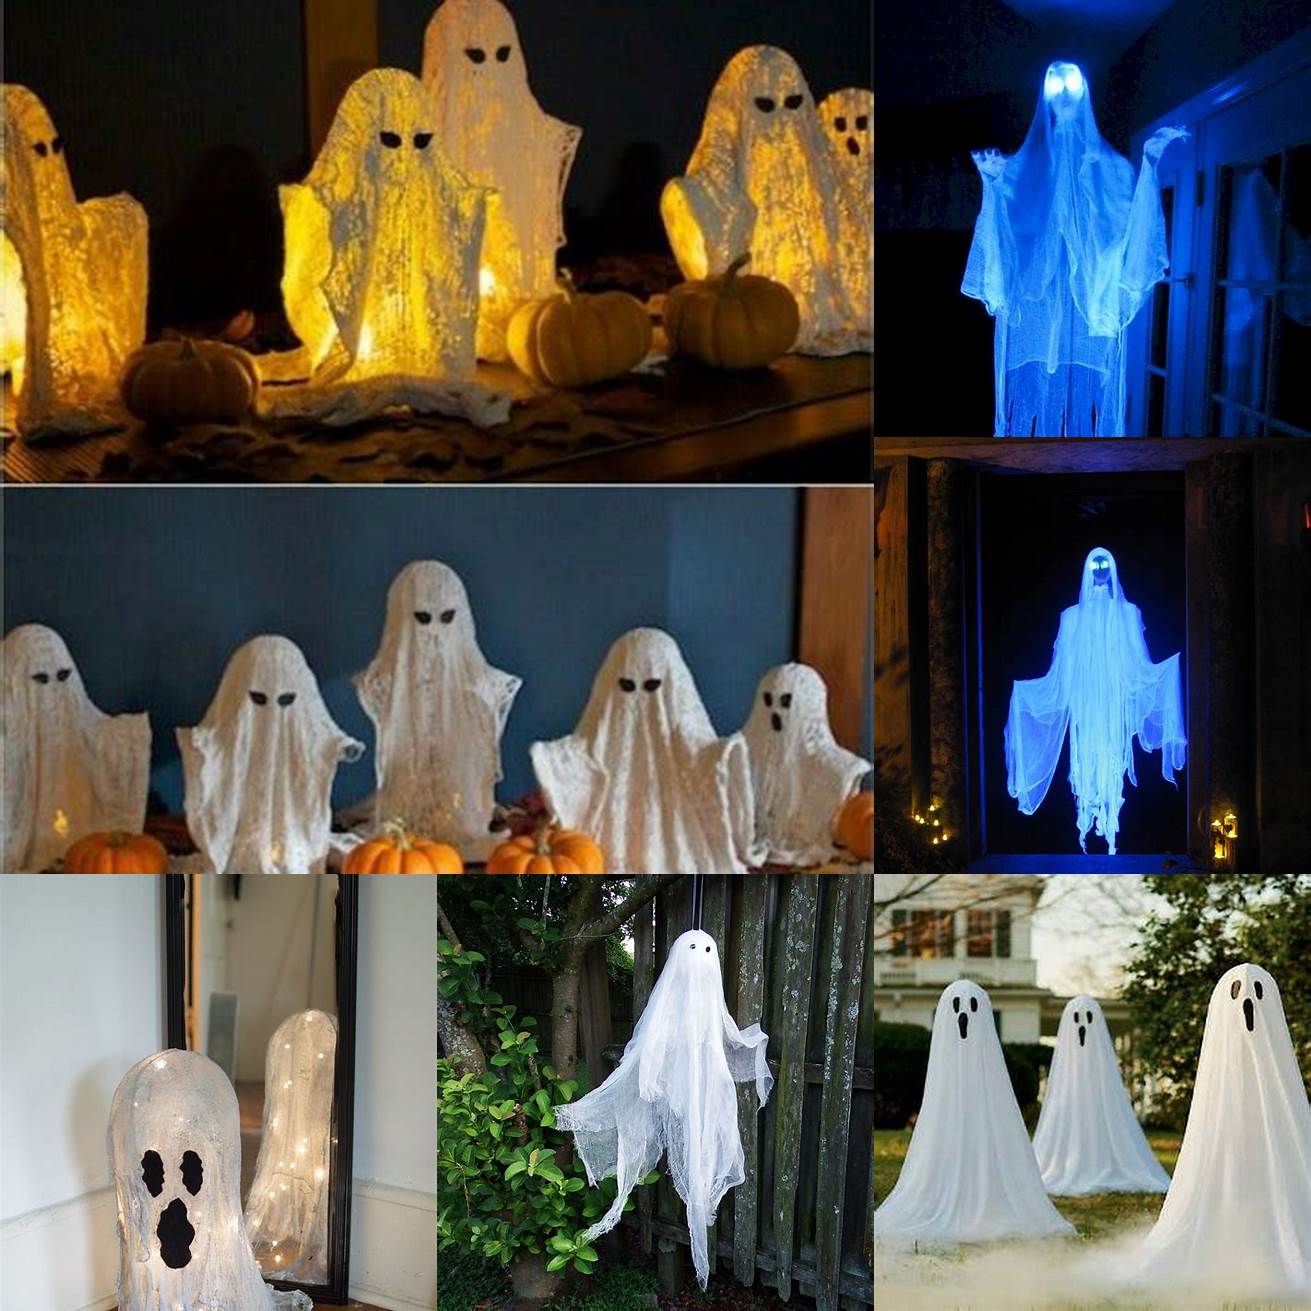 Glowing ghosts